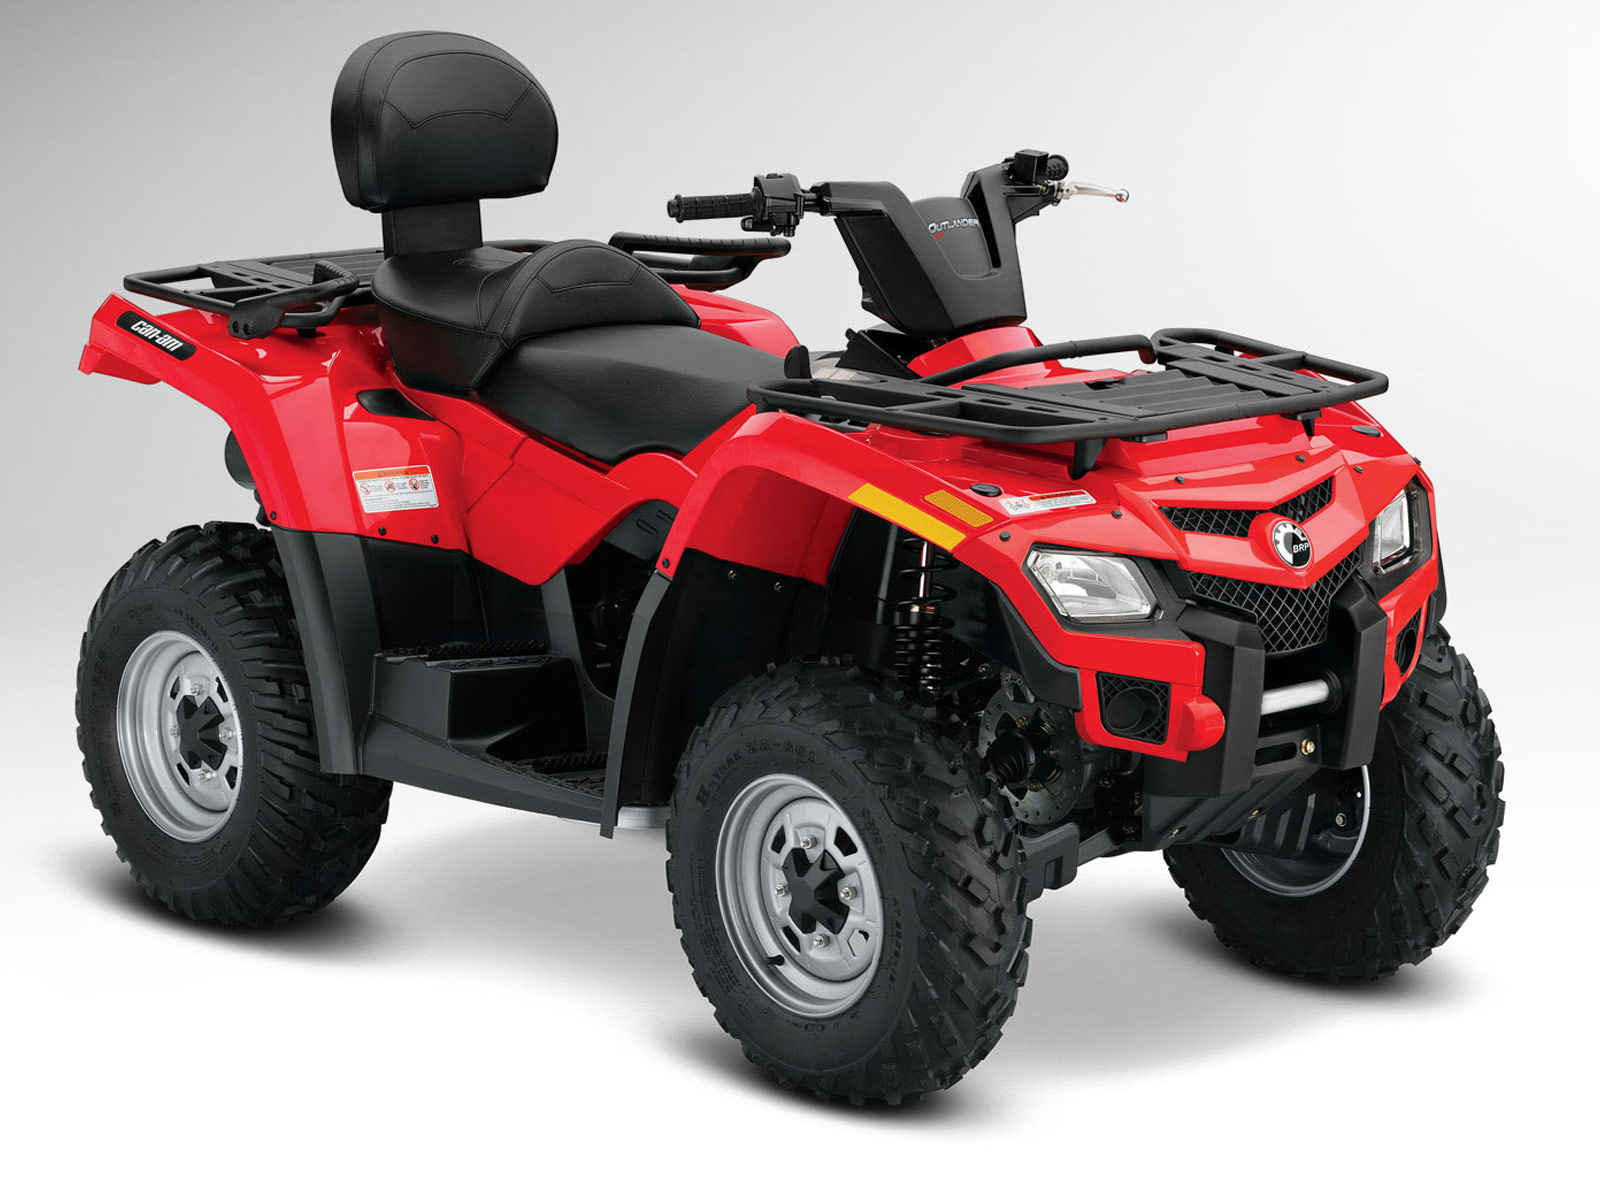 2010 Can Am Outlander 400 Service Manual